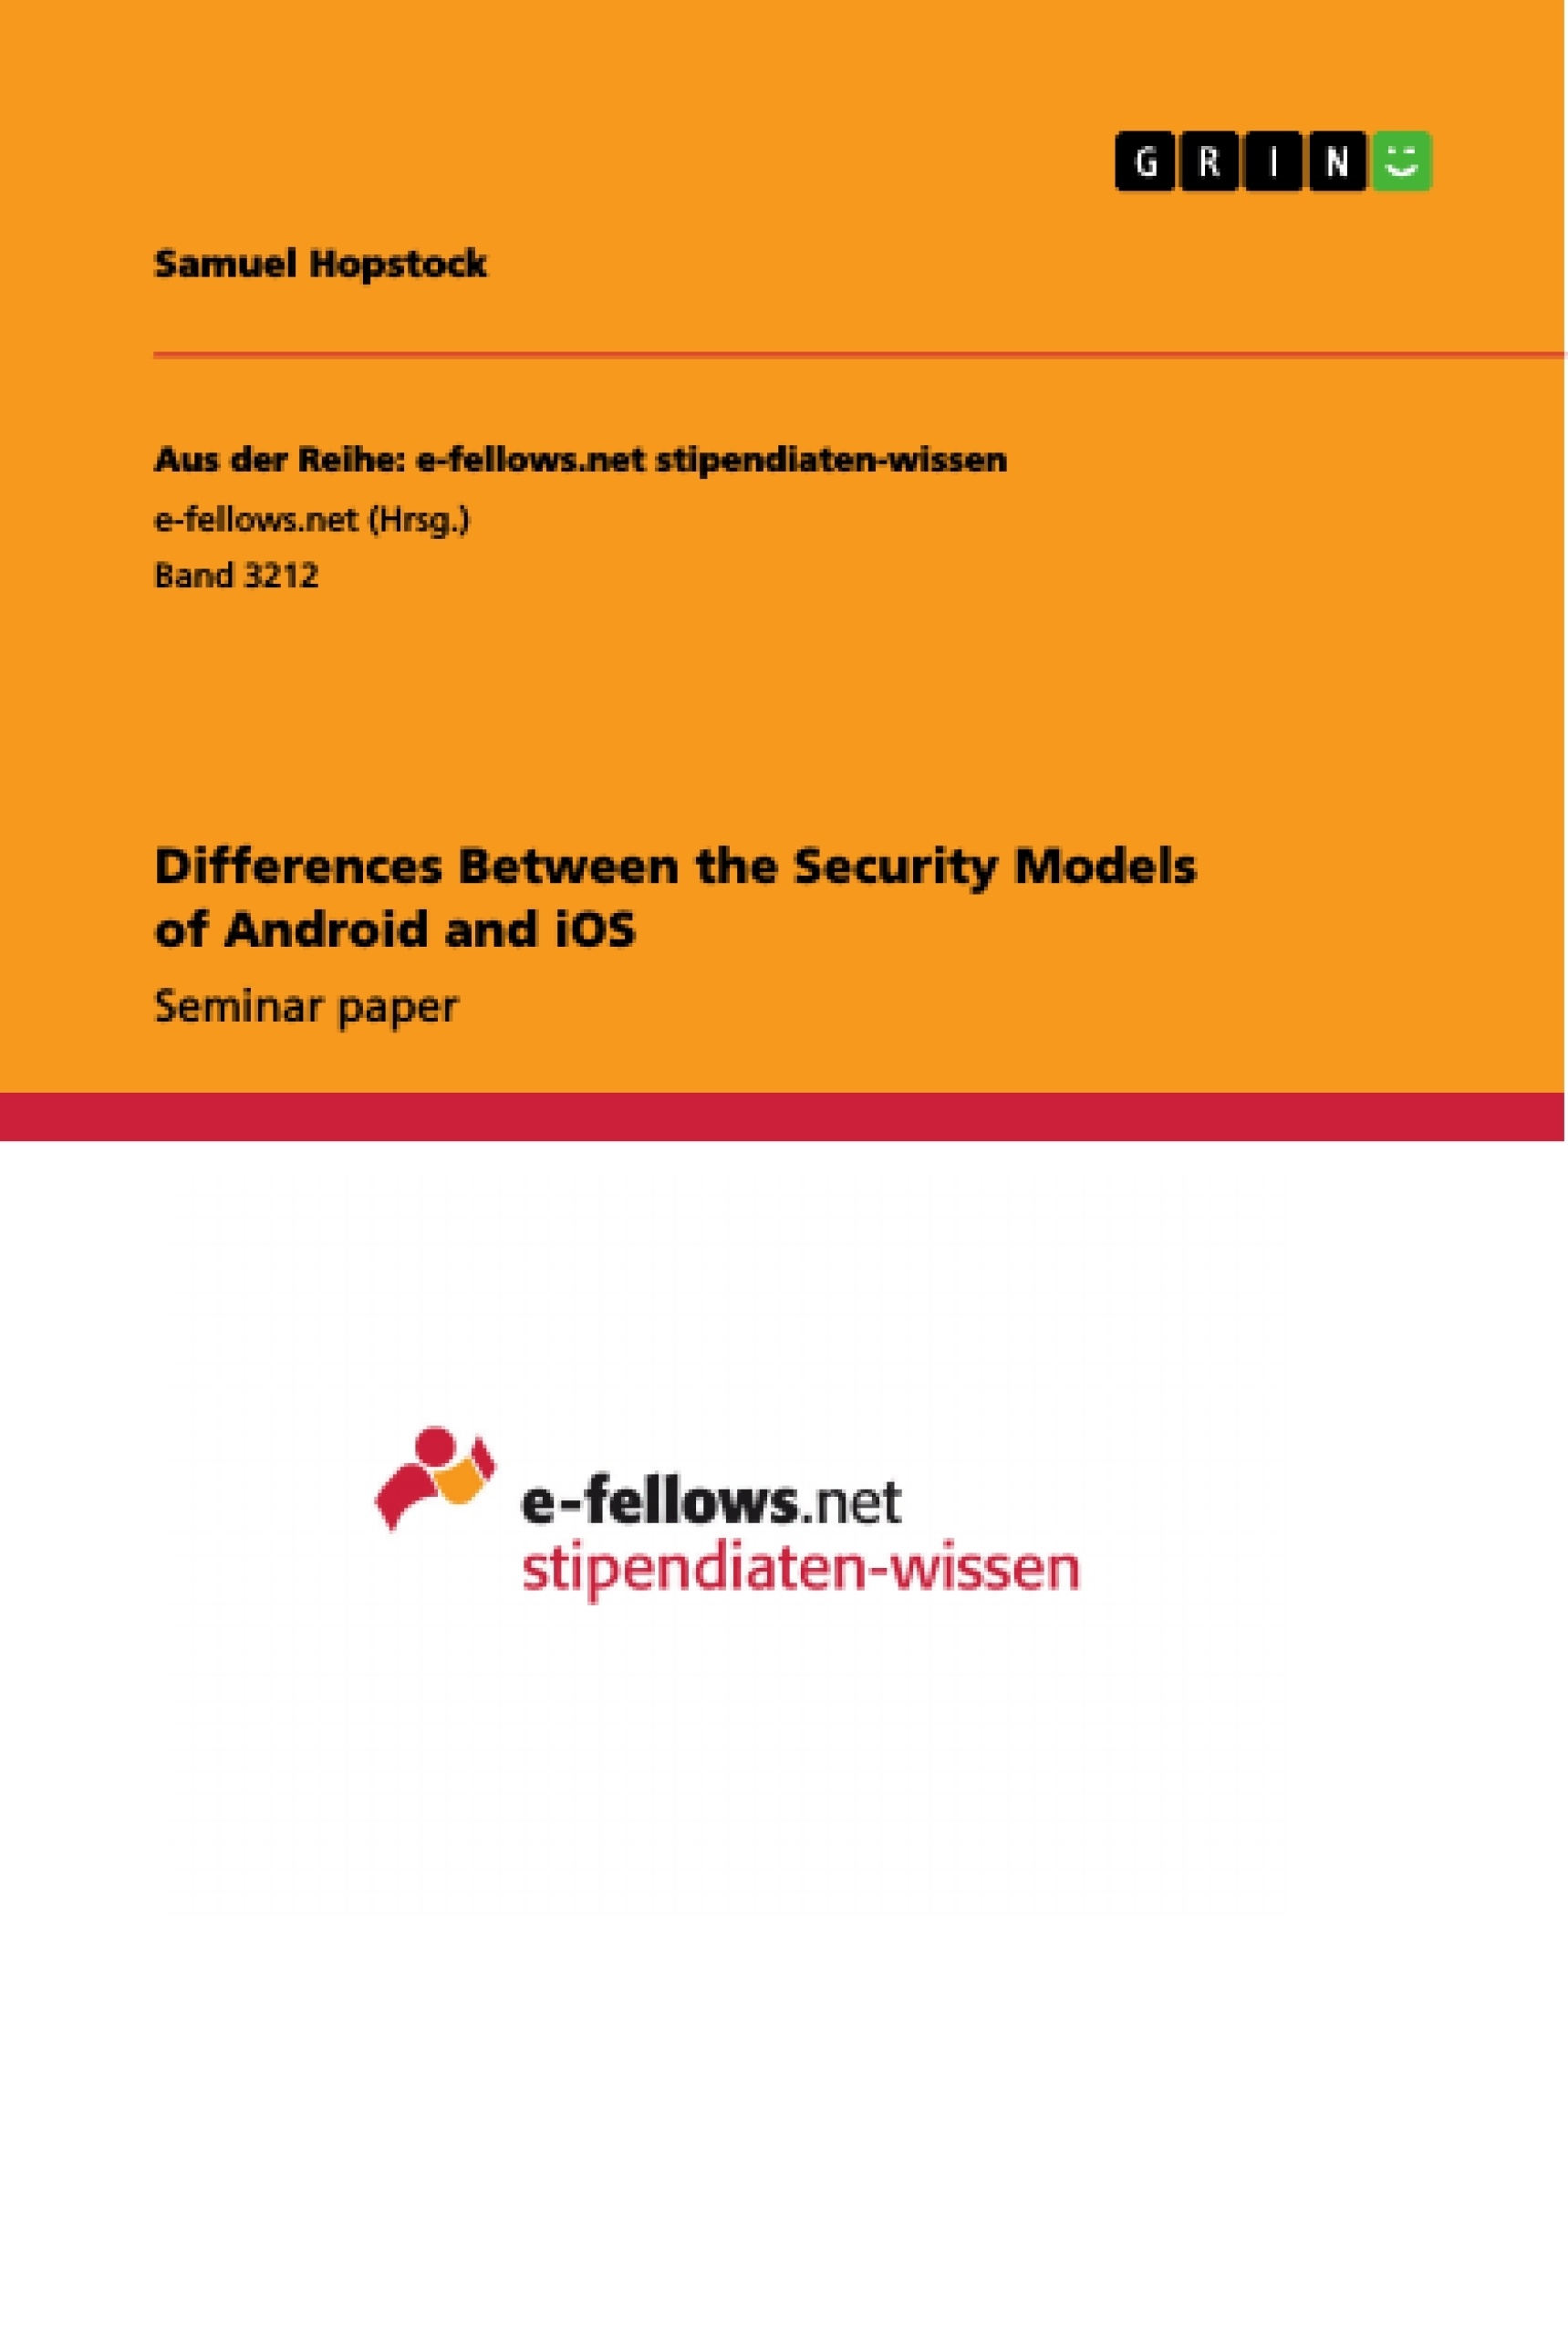 Titre: Differences Between the Security Models of Android and iOS